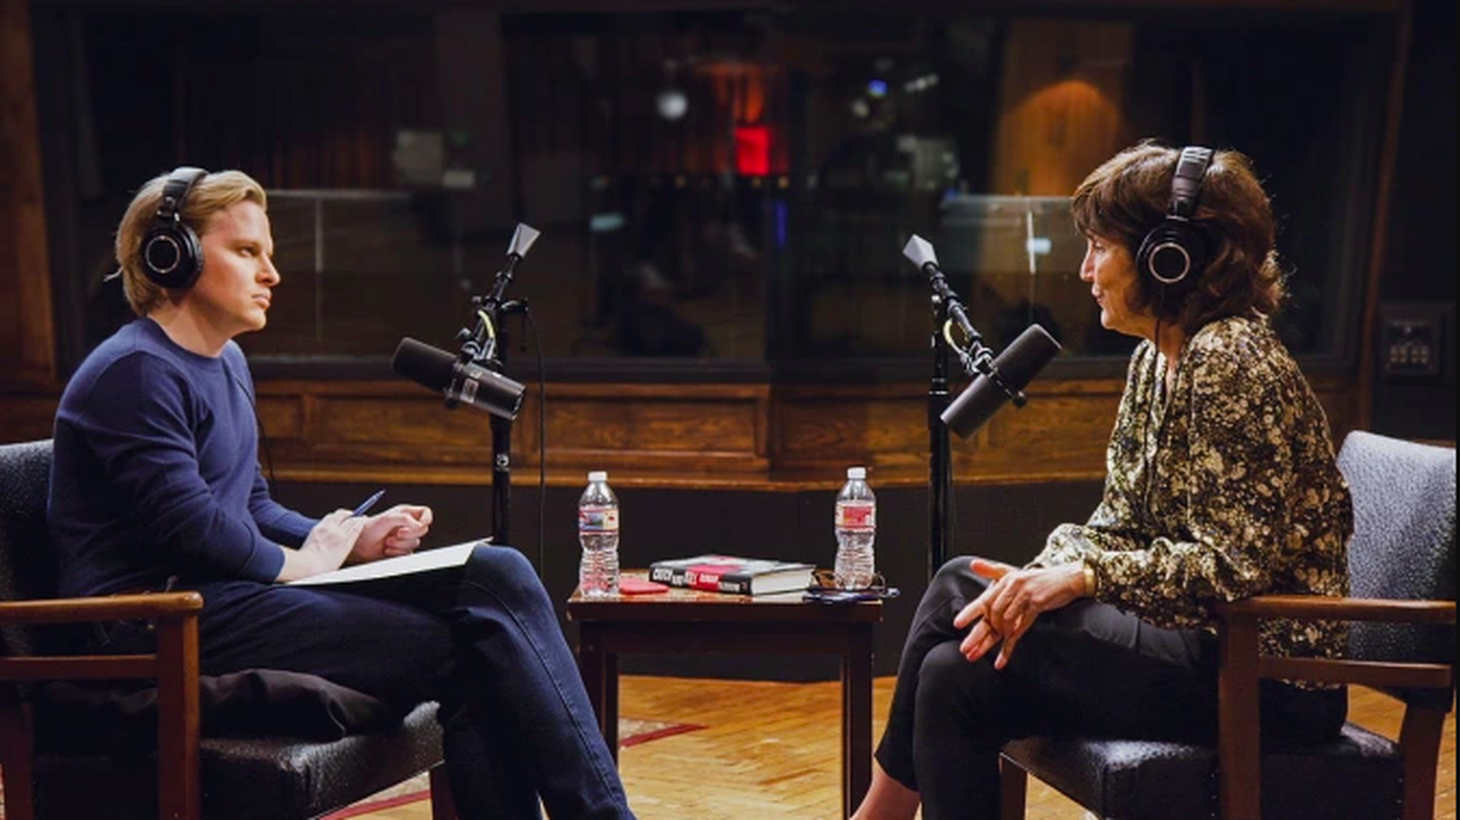 Ronan Farrow speaks with Kim Masters for HBO’s “Catch and Kill: The Podcast Tapes” documentary series.